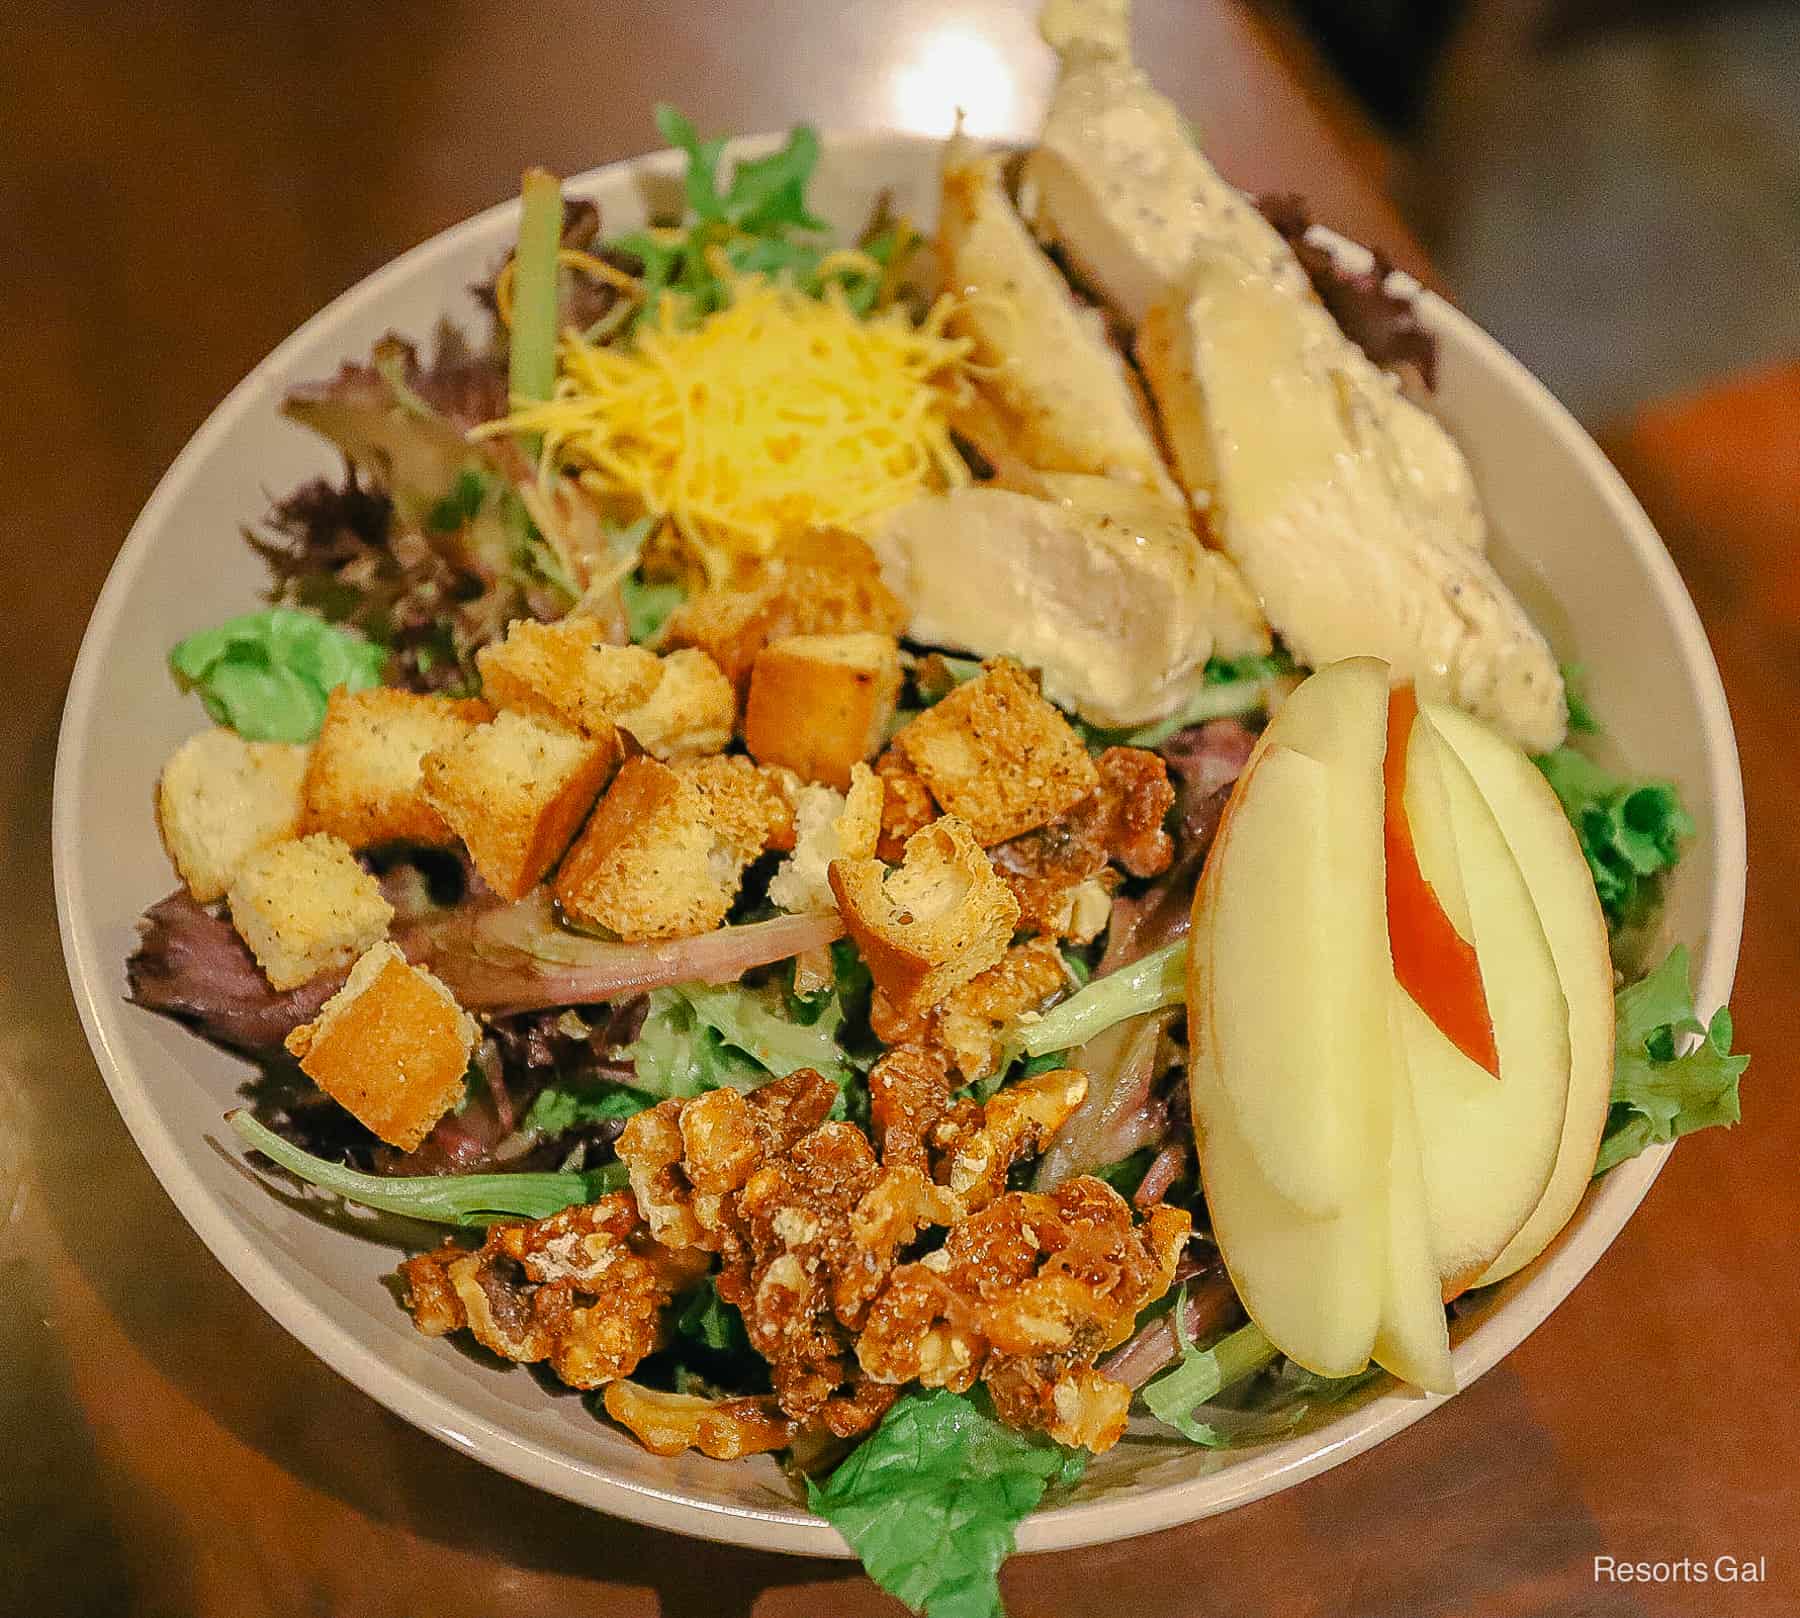 an alternate view of the large salad with chicken, croutons, and cheese